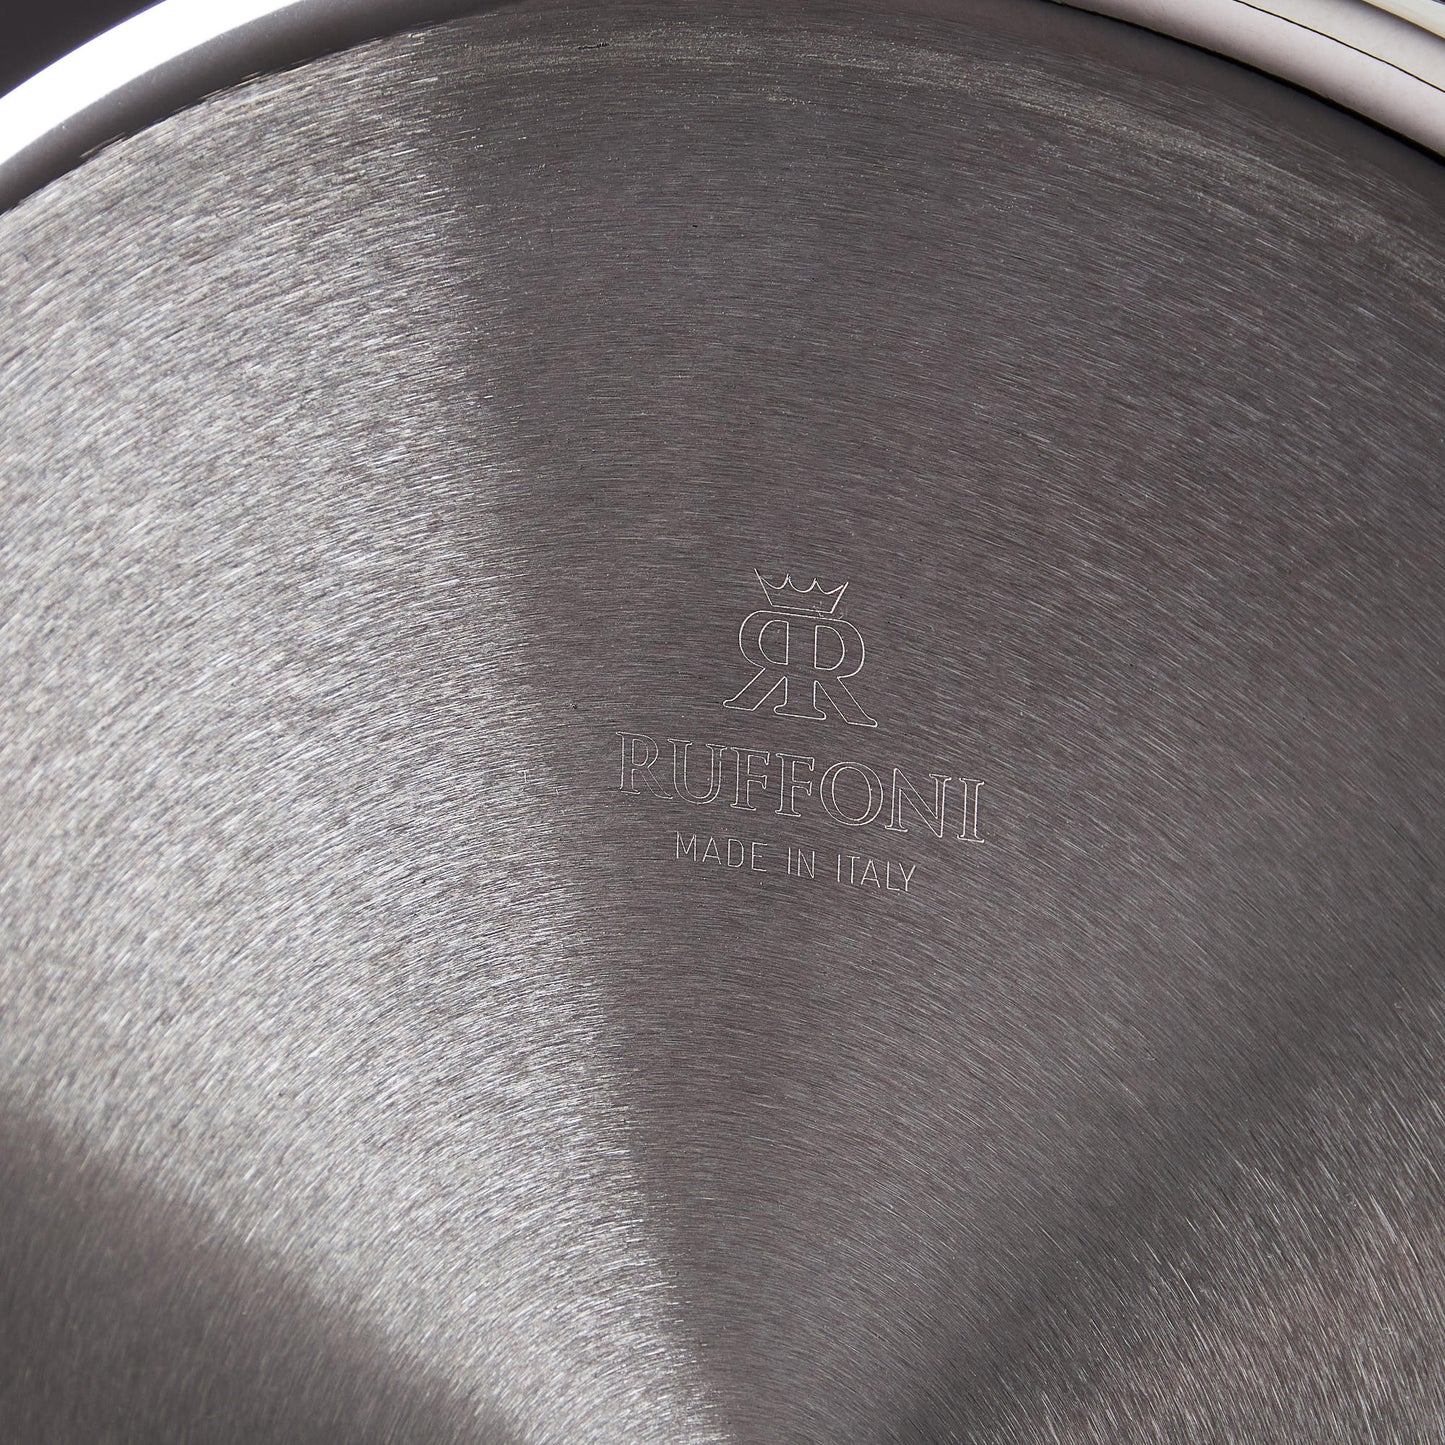 Ruffoni Made in Italy brand logo stamped under stainless steel saucepan for authenticity